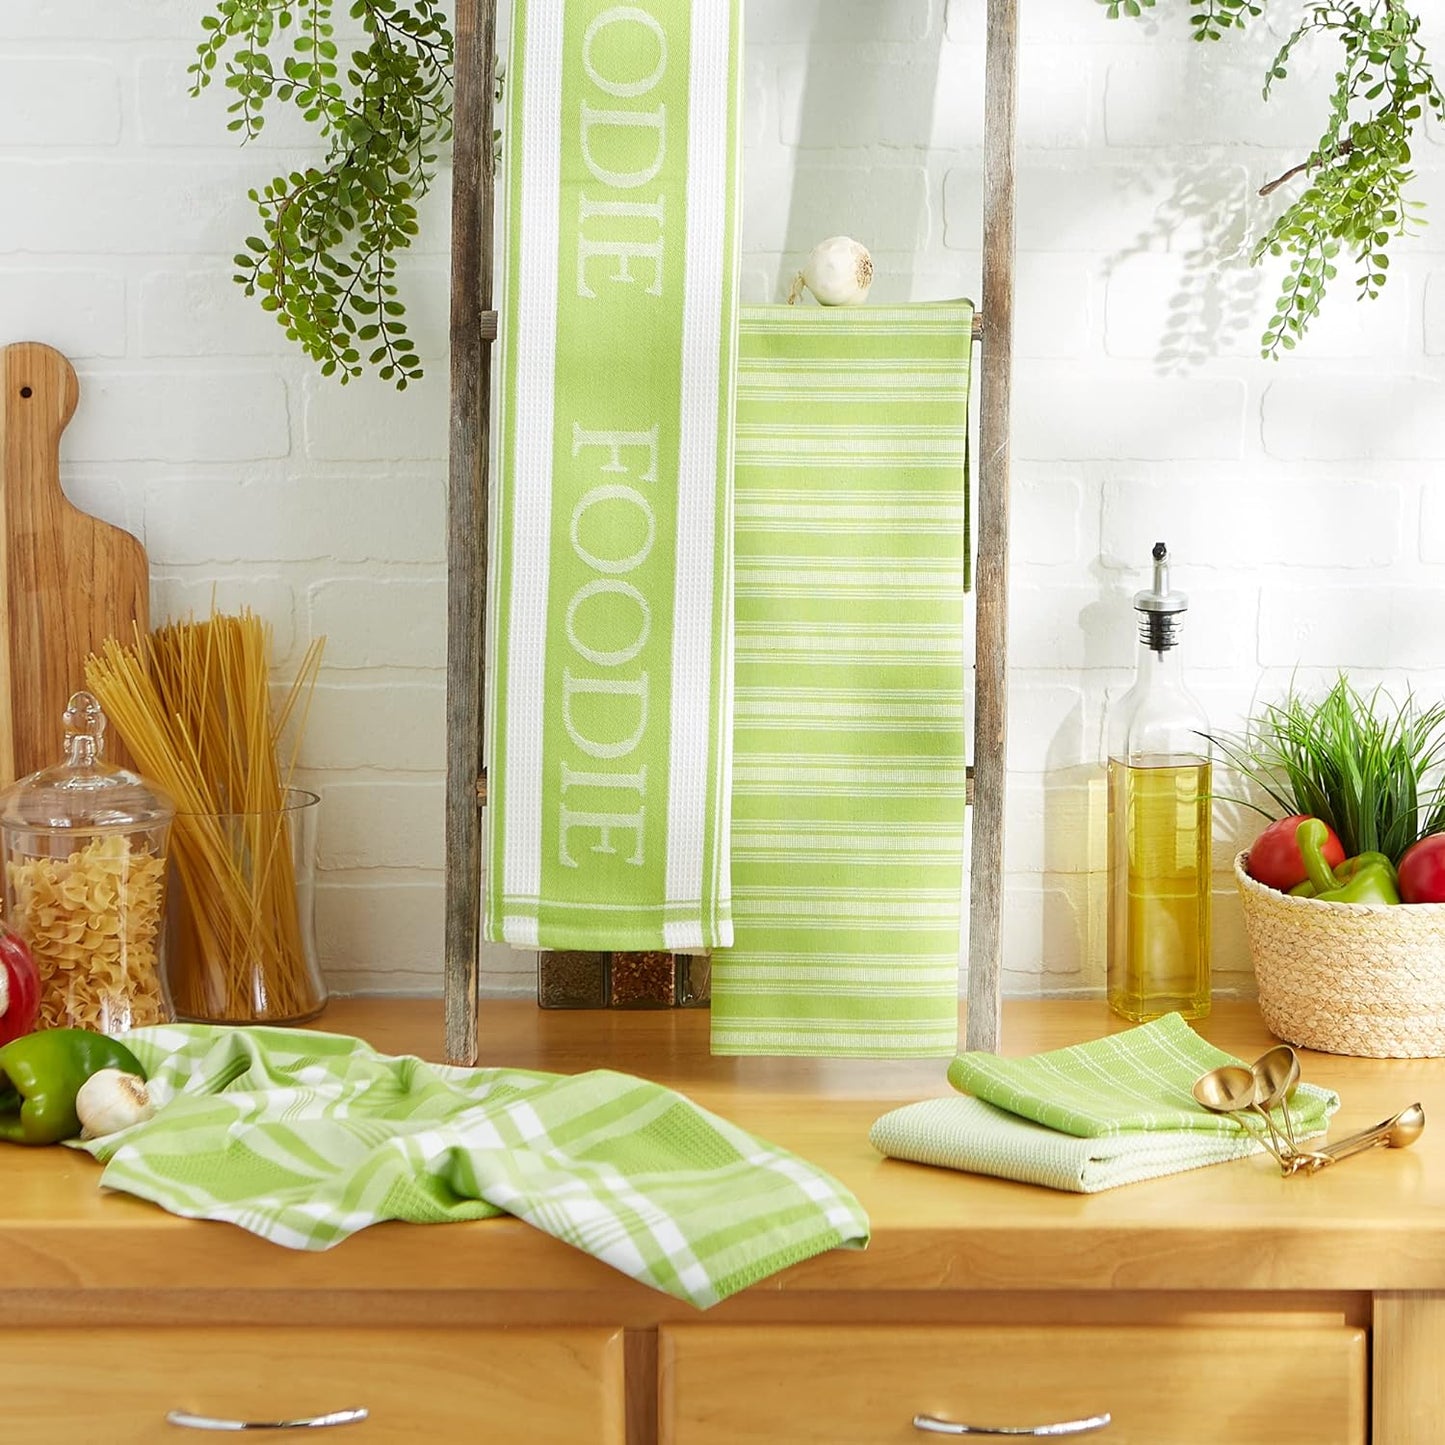 Everyday Collection Foodie Kitchen Set, Dishtowel & Dishcloth, Lime, 5 Piece